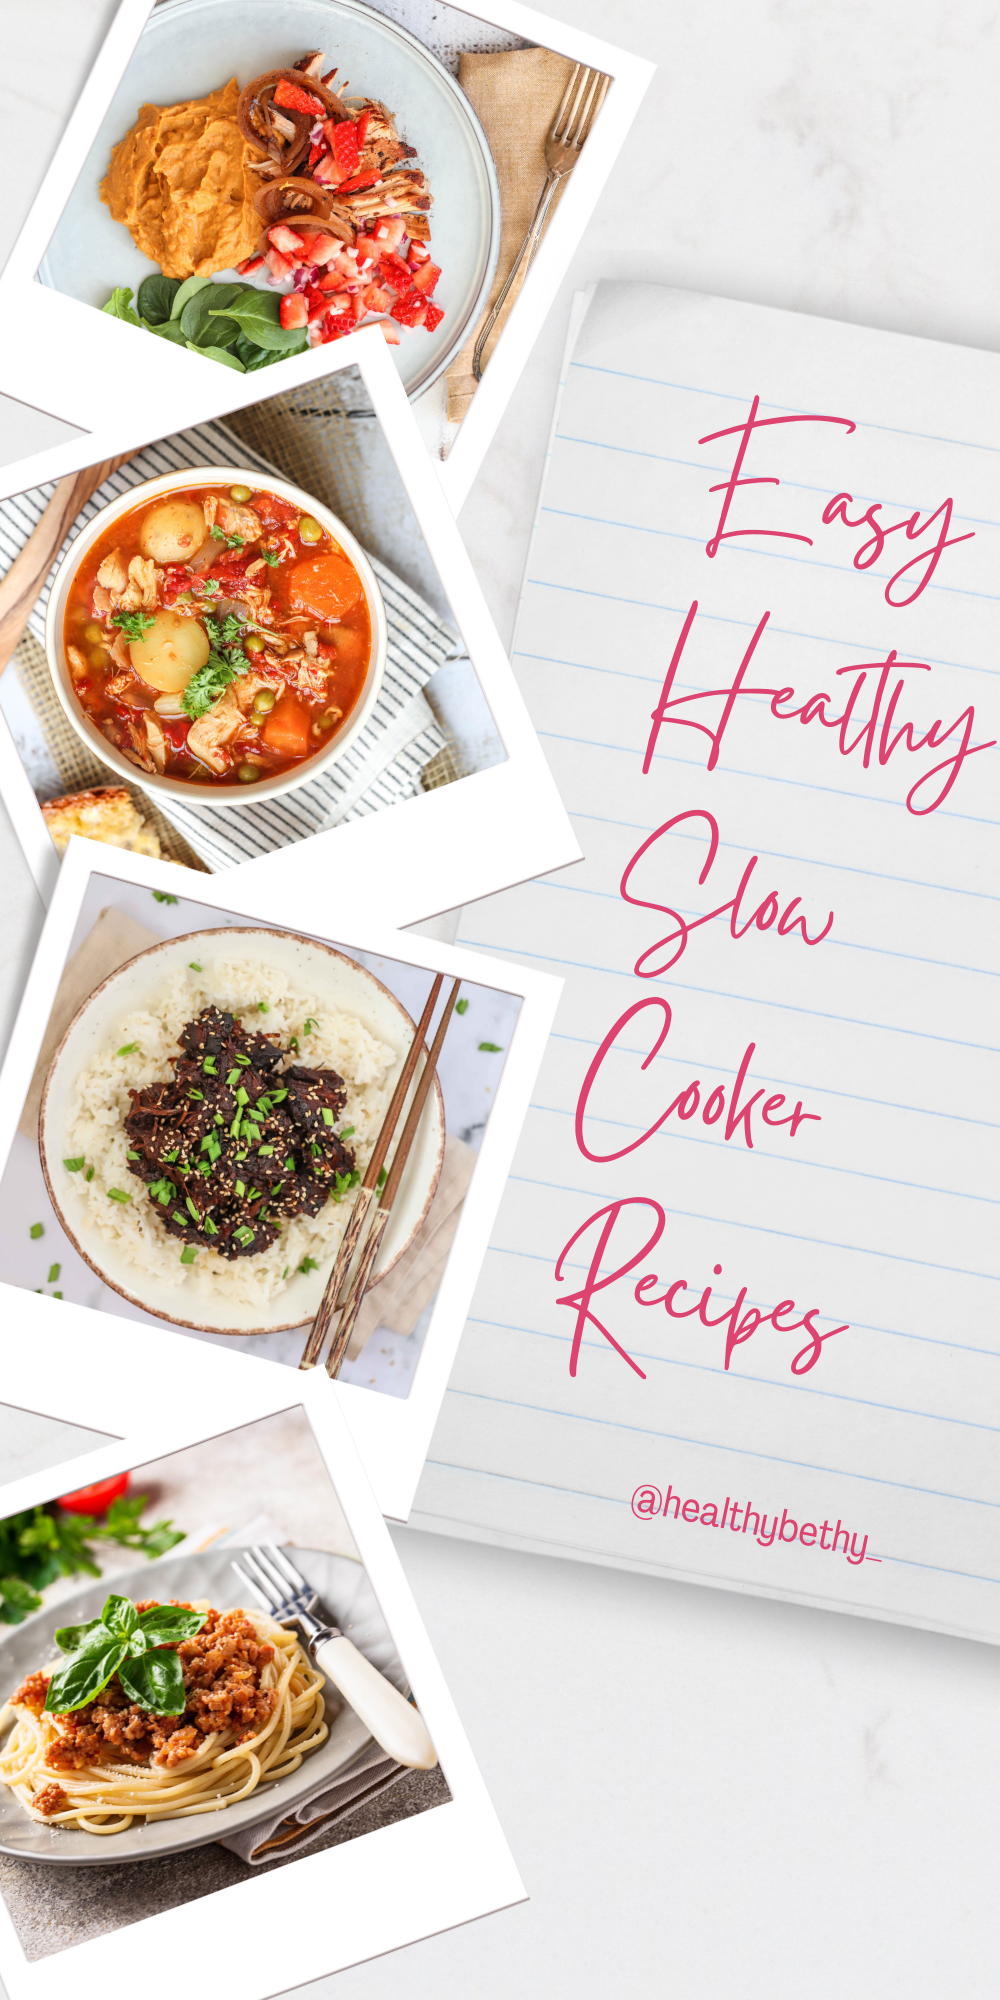 Easy Healthy Slow Cooker Recipes. Here are 4 delicious recipes if you're struggling for ideas. All take less than 10 minutes to prepare and have less than 400 calories.